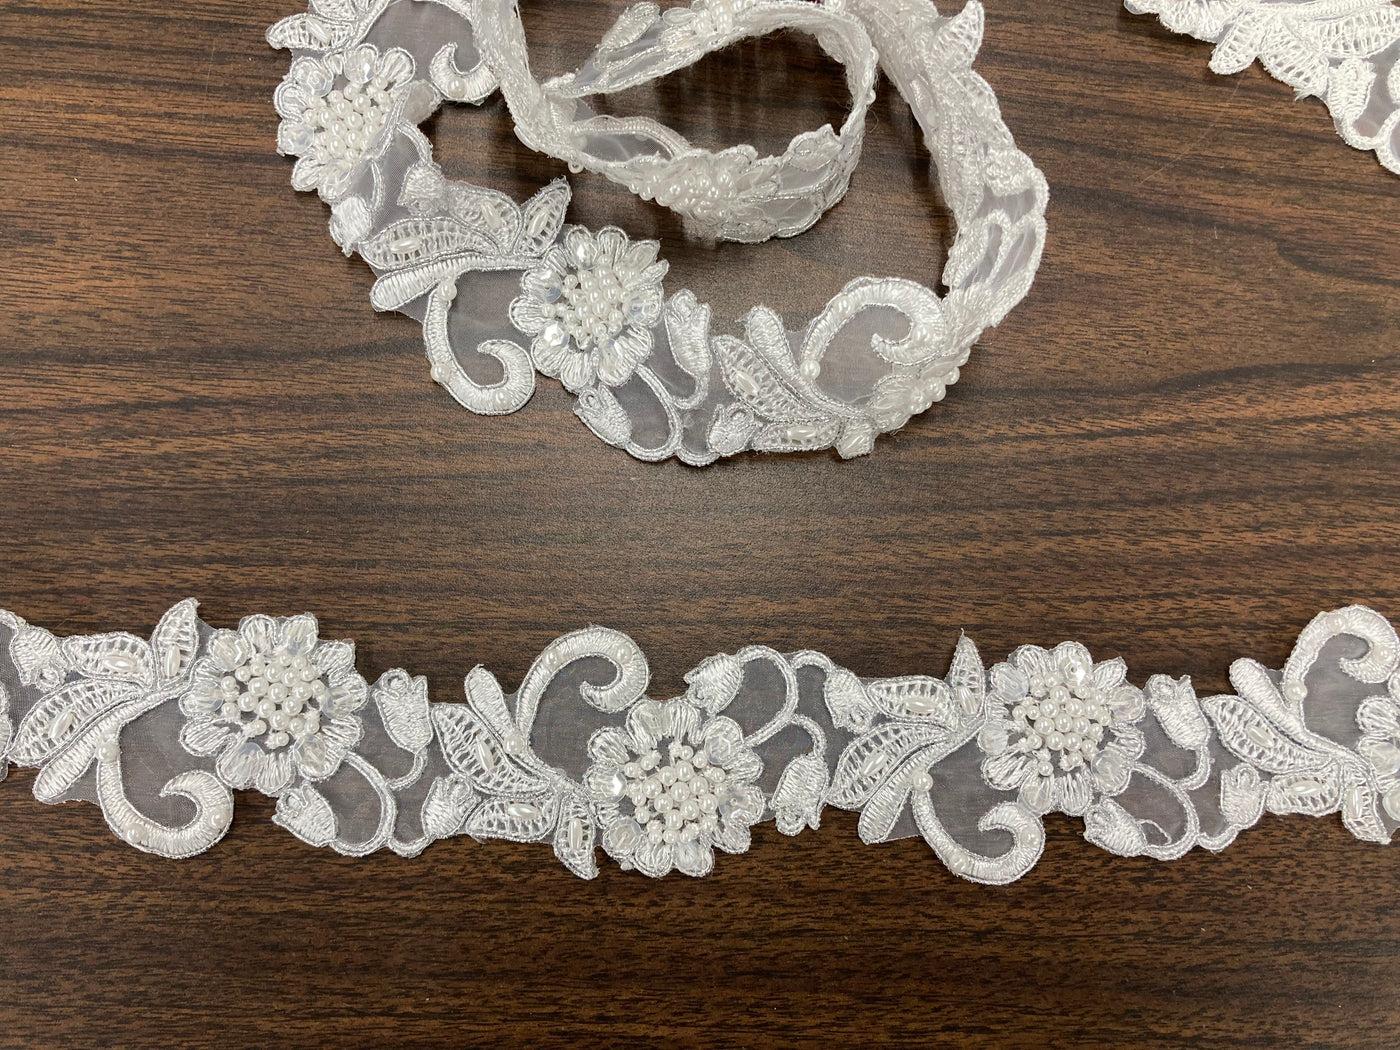 Corded & Beaded Embroidered Trimming on 100% Polyester Organza or Mesh Net Lace.  Sold by the yard.  Lace Usa